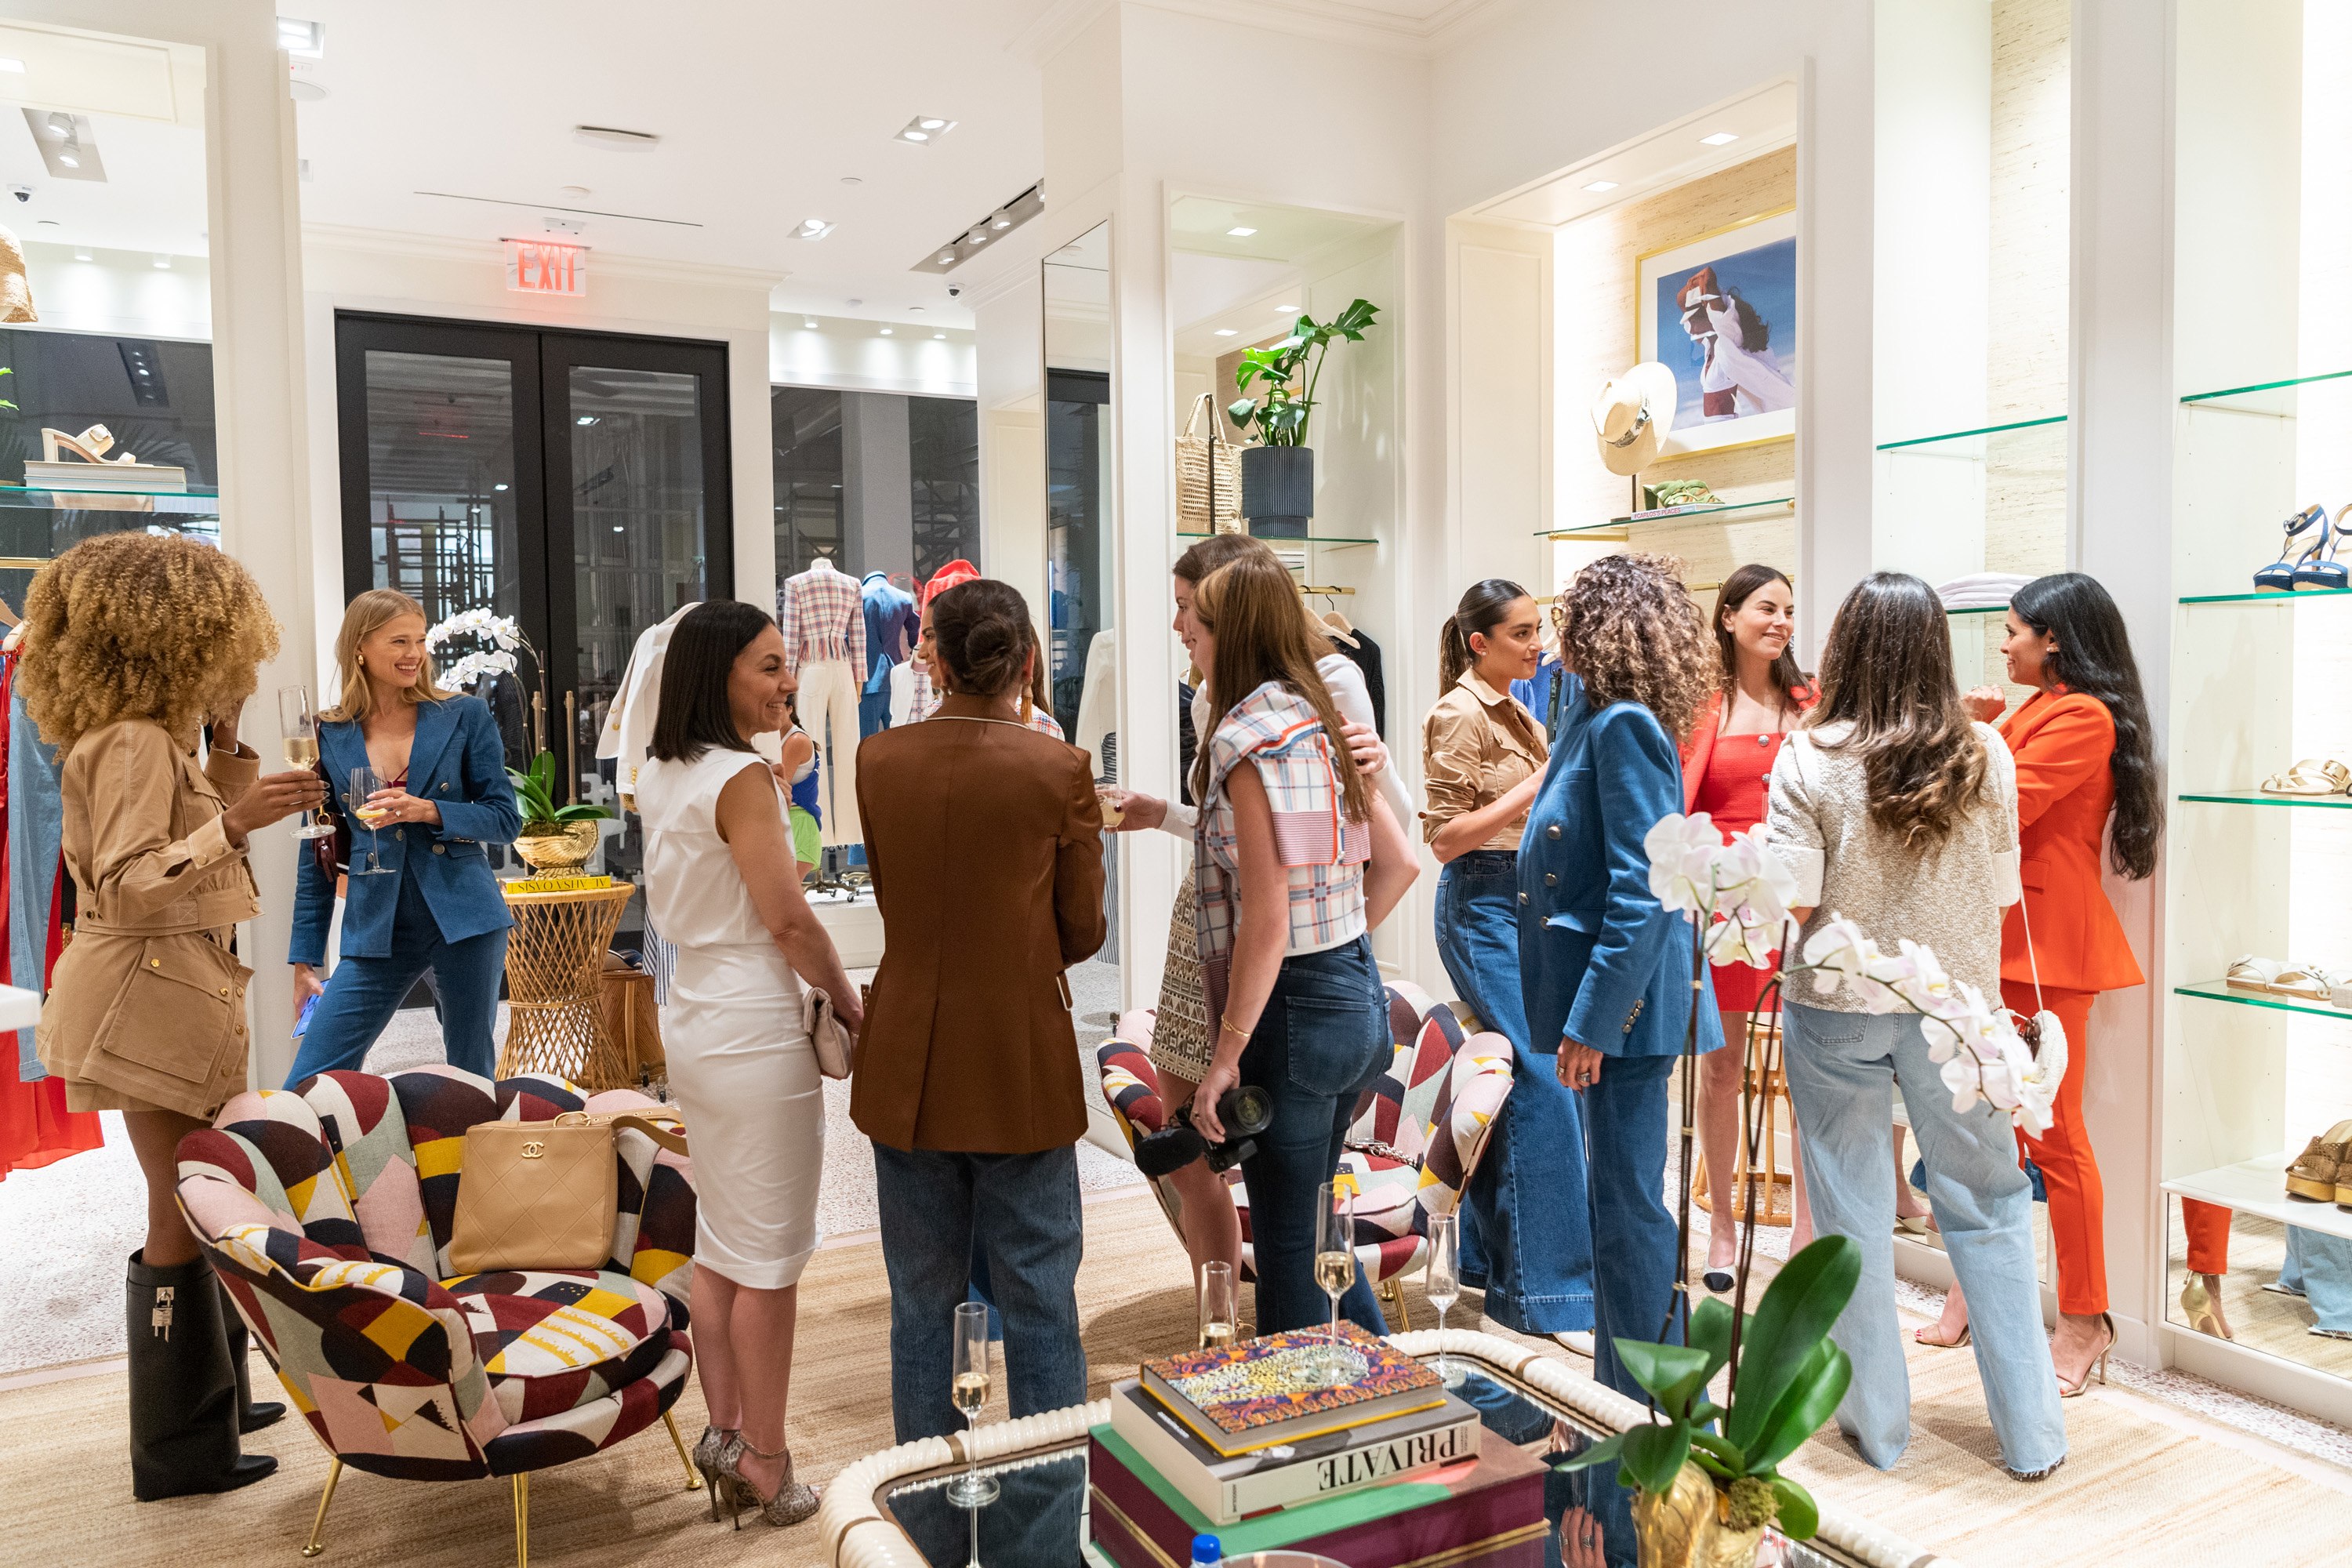 Guests mingling in the new Veronica Beard boutique located on Level 2 of Bal Harbour Shops